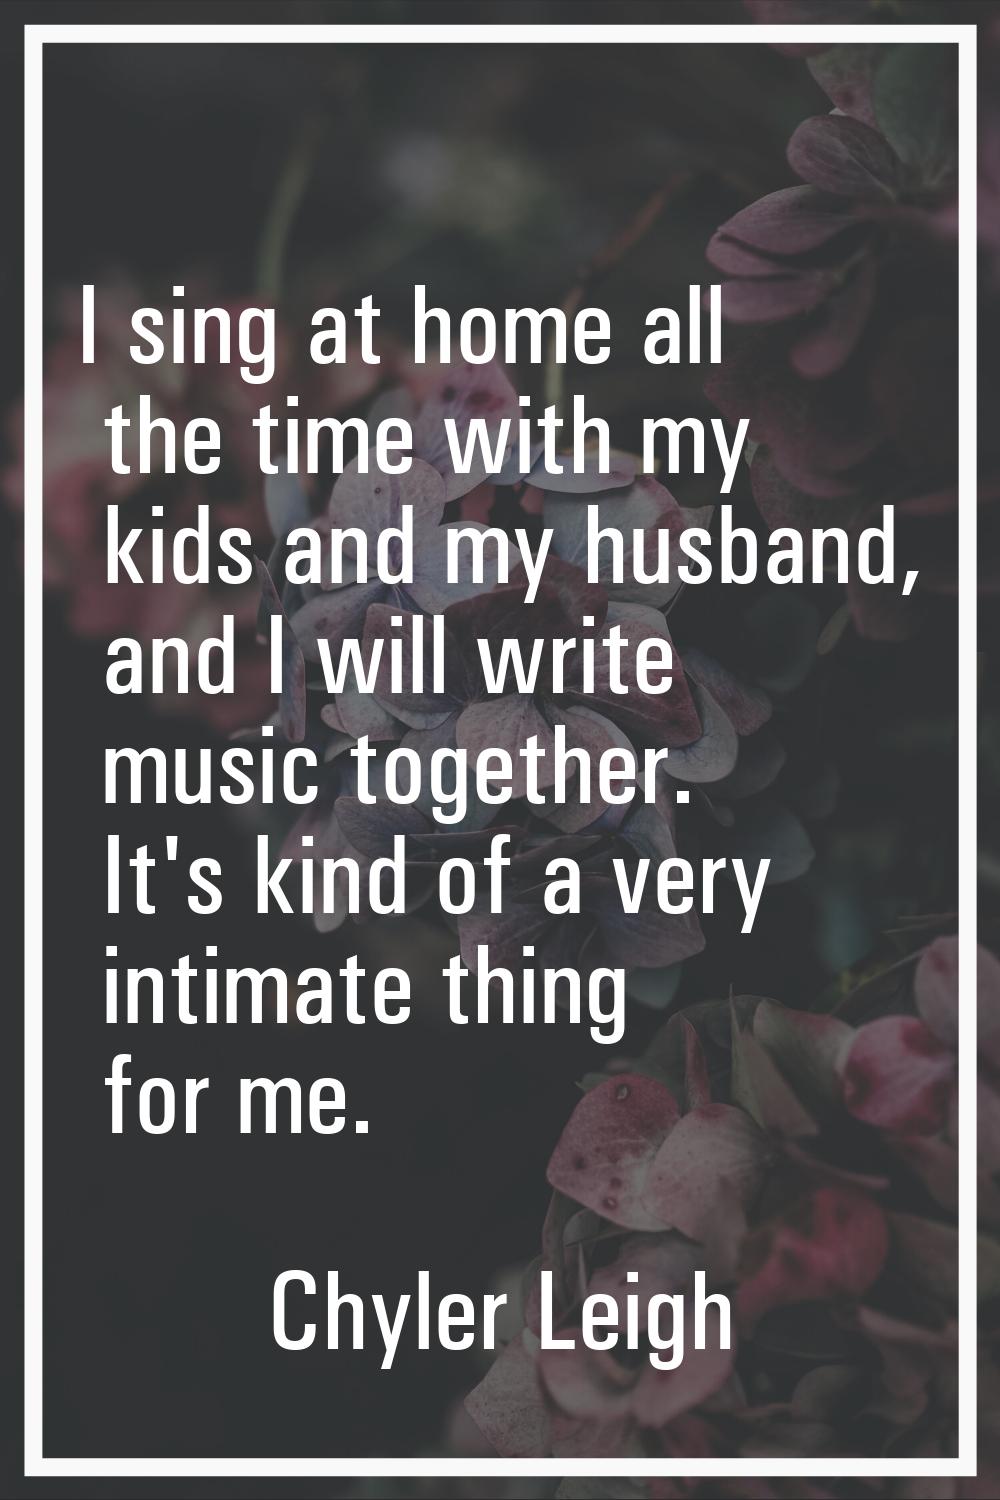 I sing at home all the time with my kids and my husband, and I will write music together. It's kind